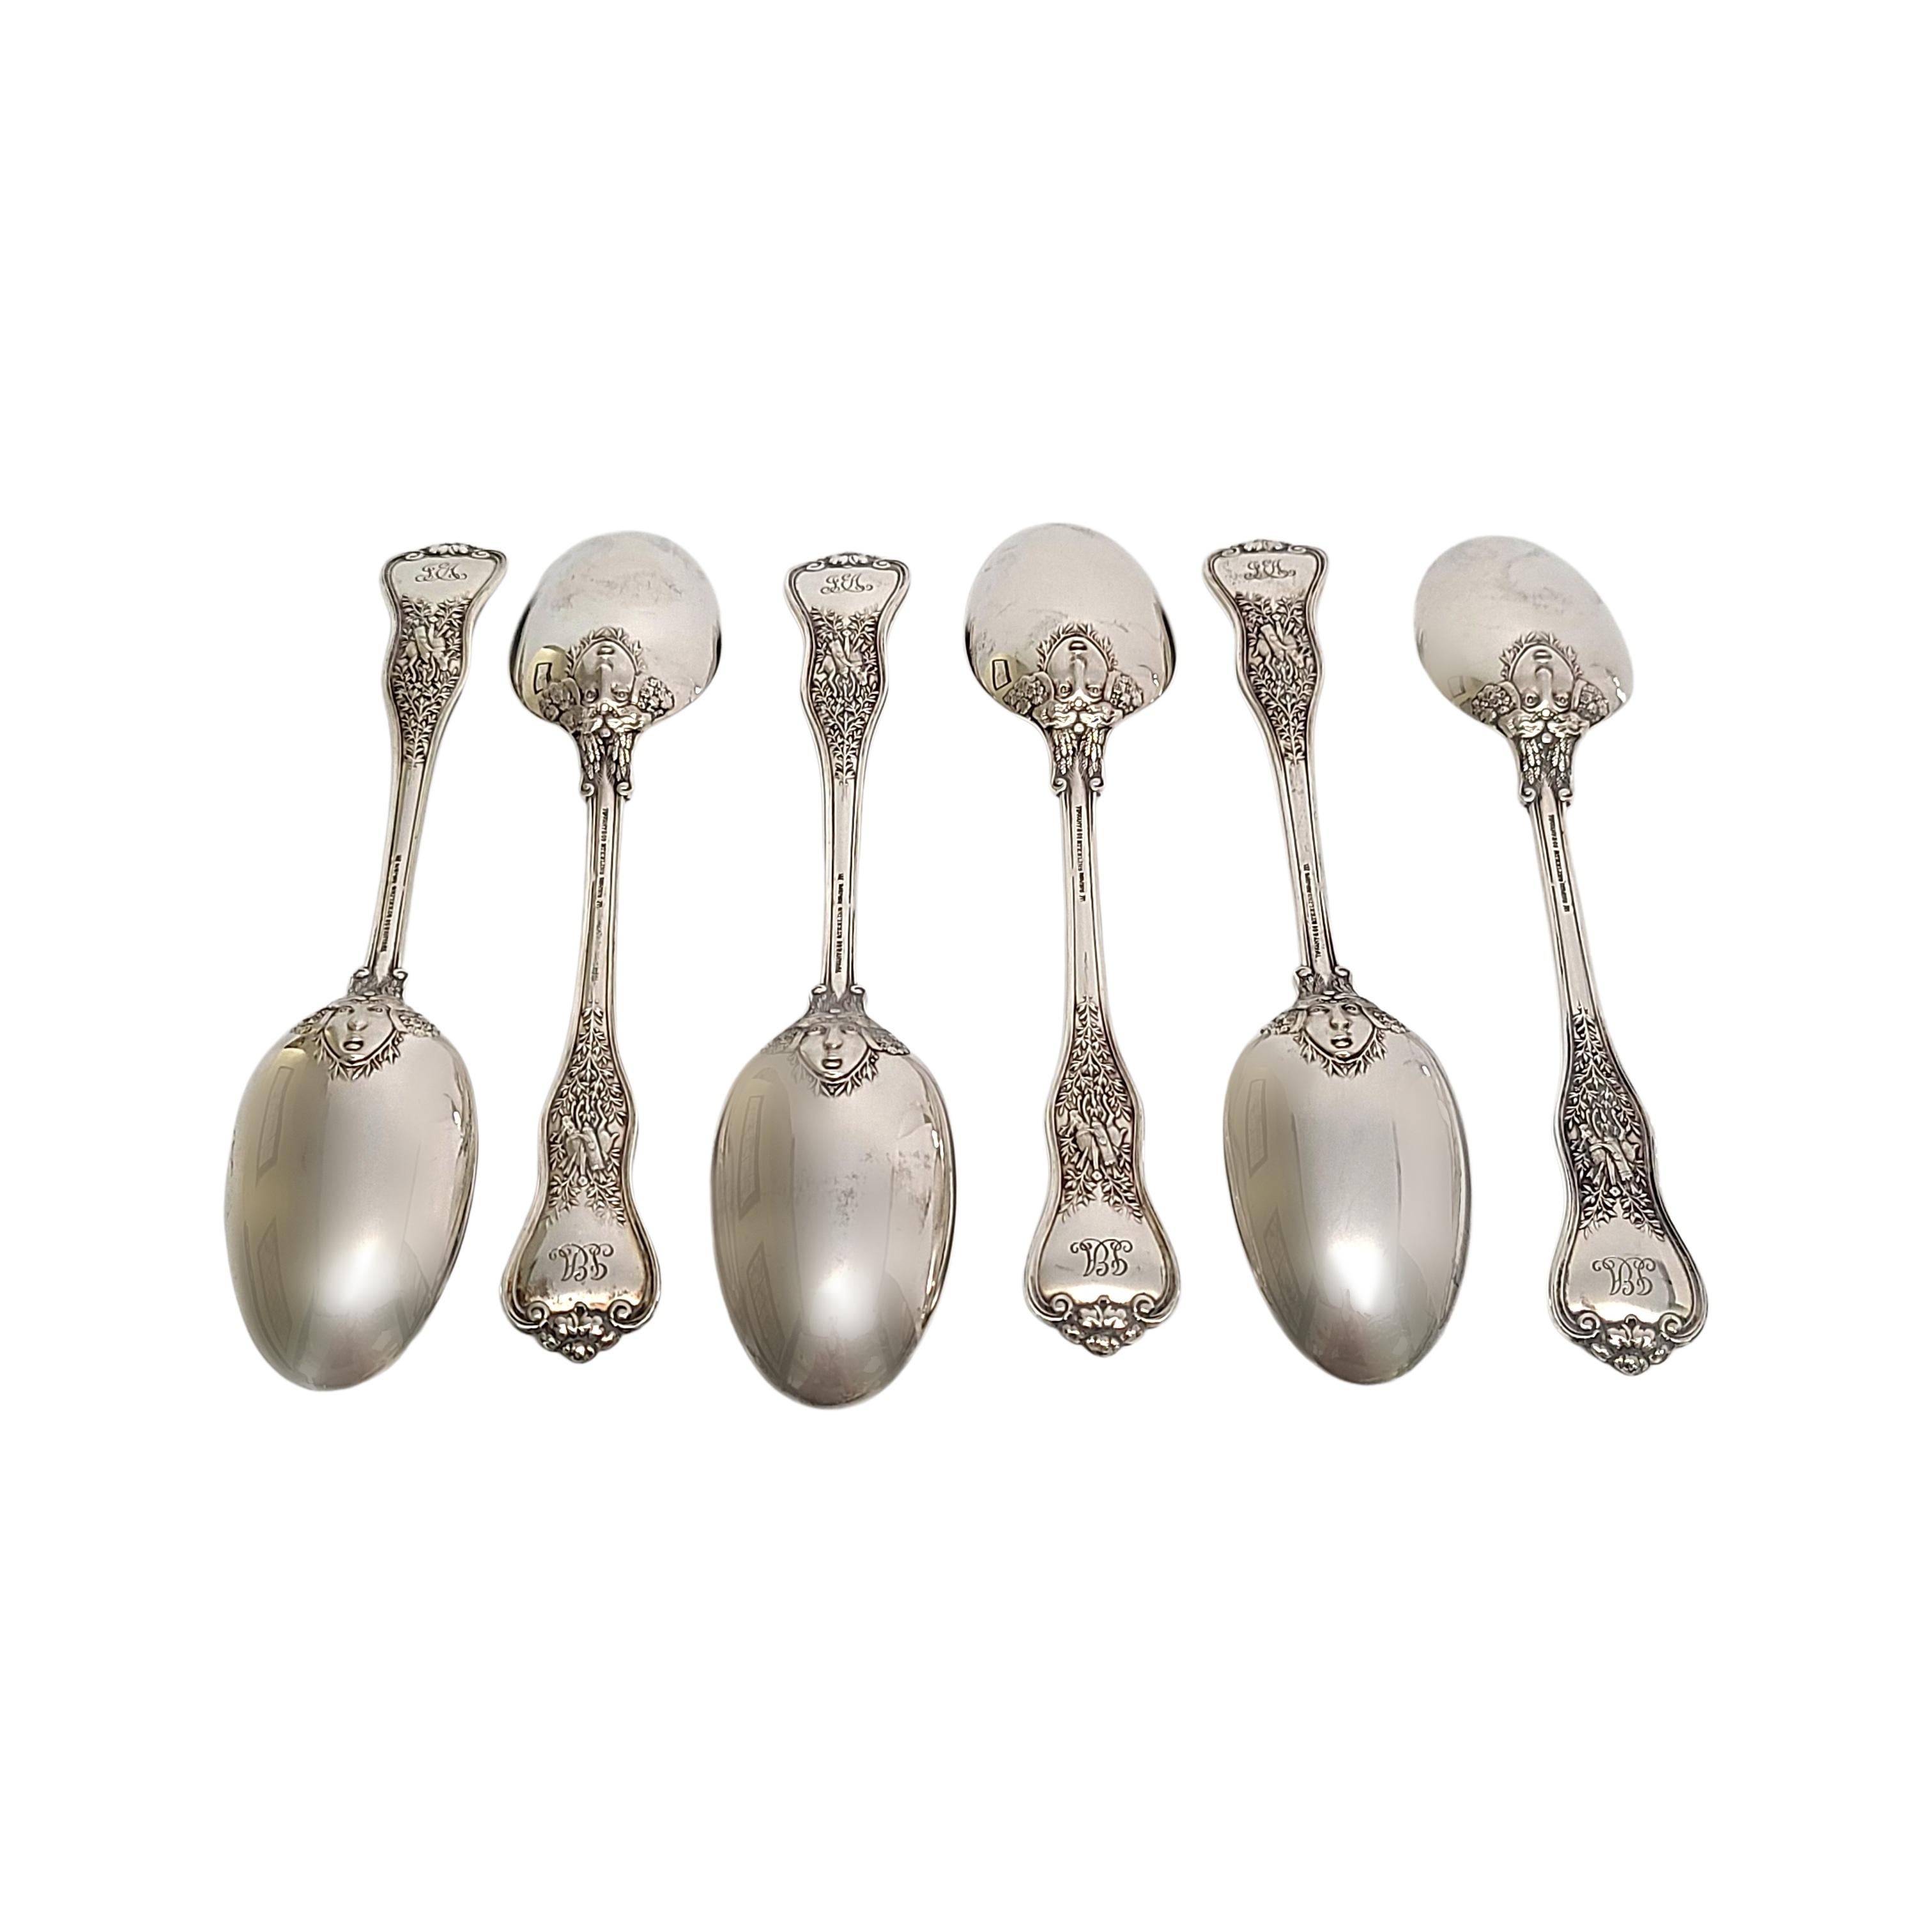 Set of 6 Tiffany & Co sterling silver teaspoons in the Olympian 1878 pattern.

Monogram appears to be JEA

Olympian is an ornate and elaborate multi-motif pattern, featuring 17 different sharply carved handle decorations depicting scenes from